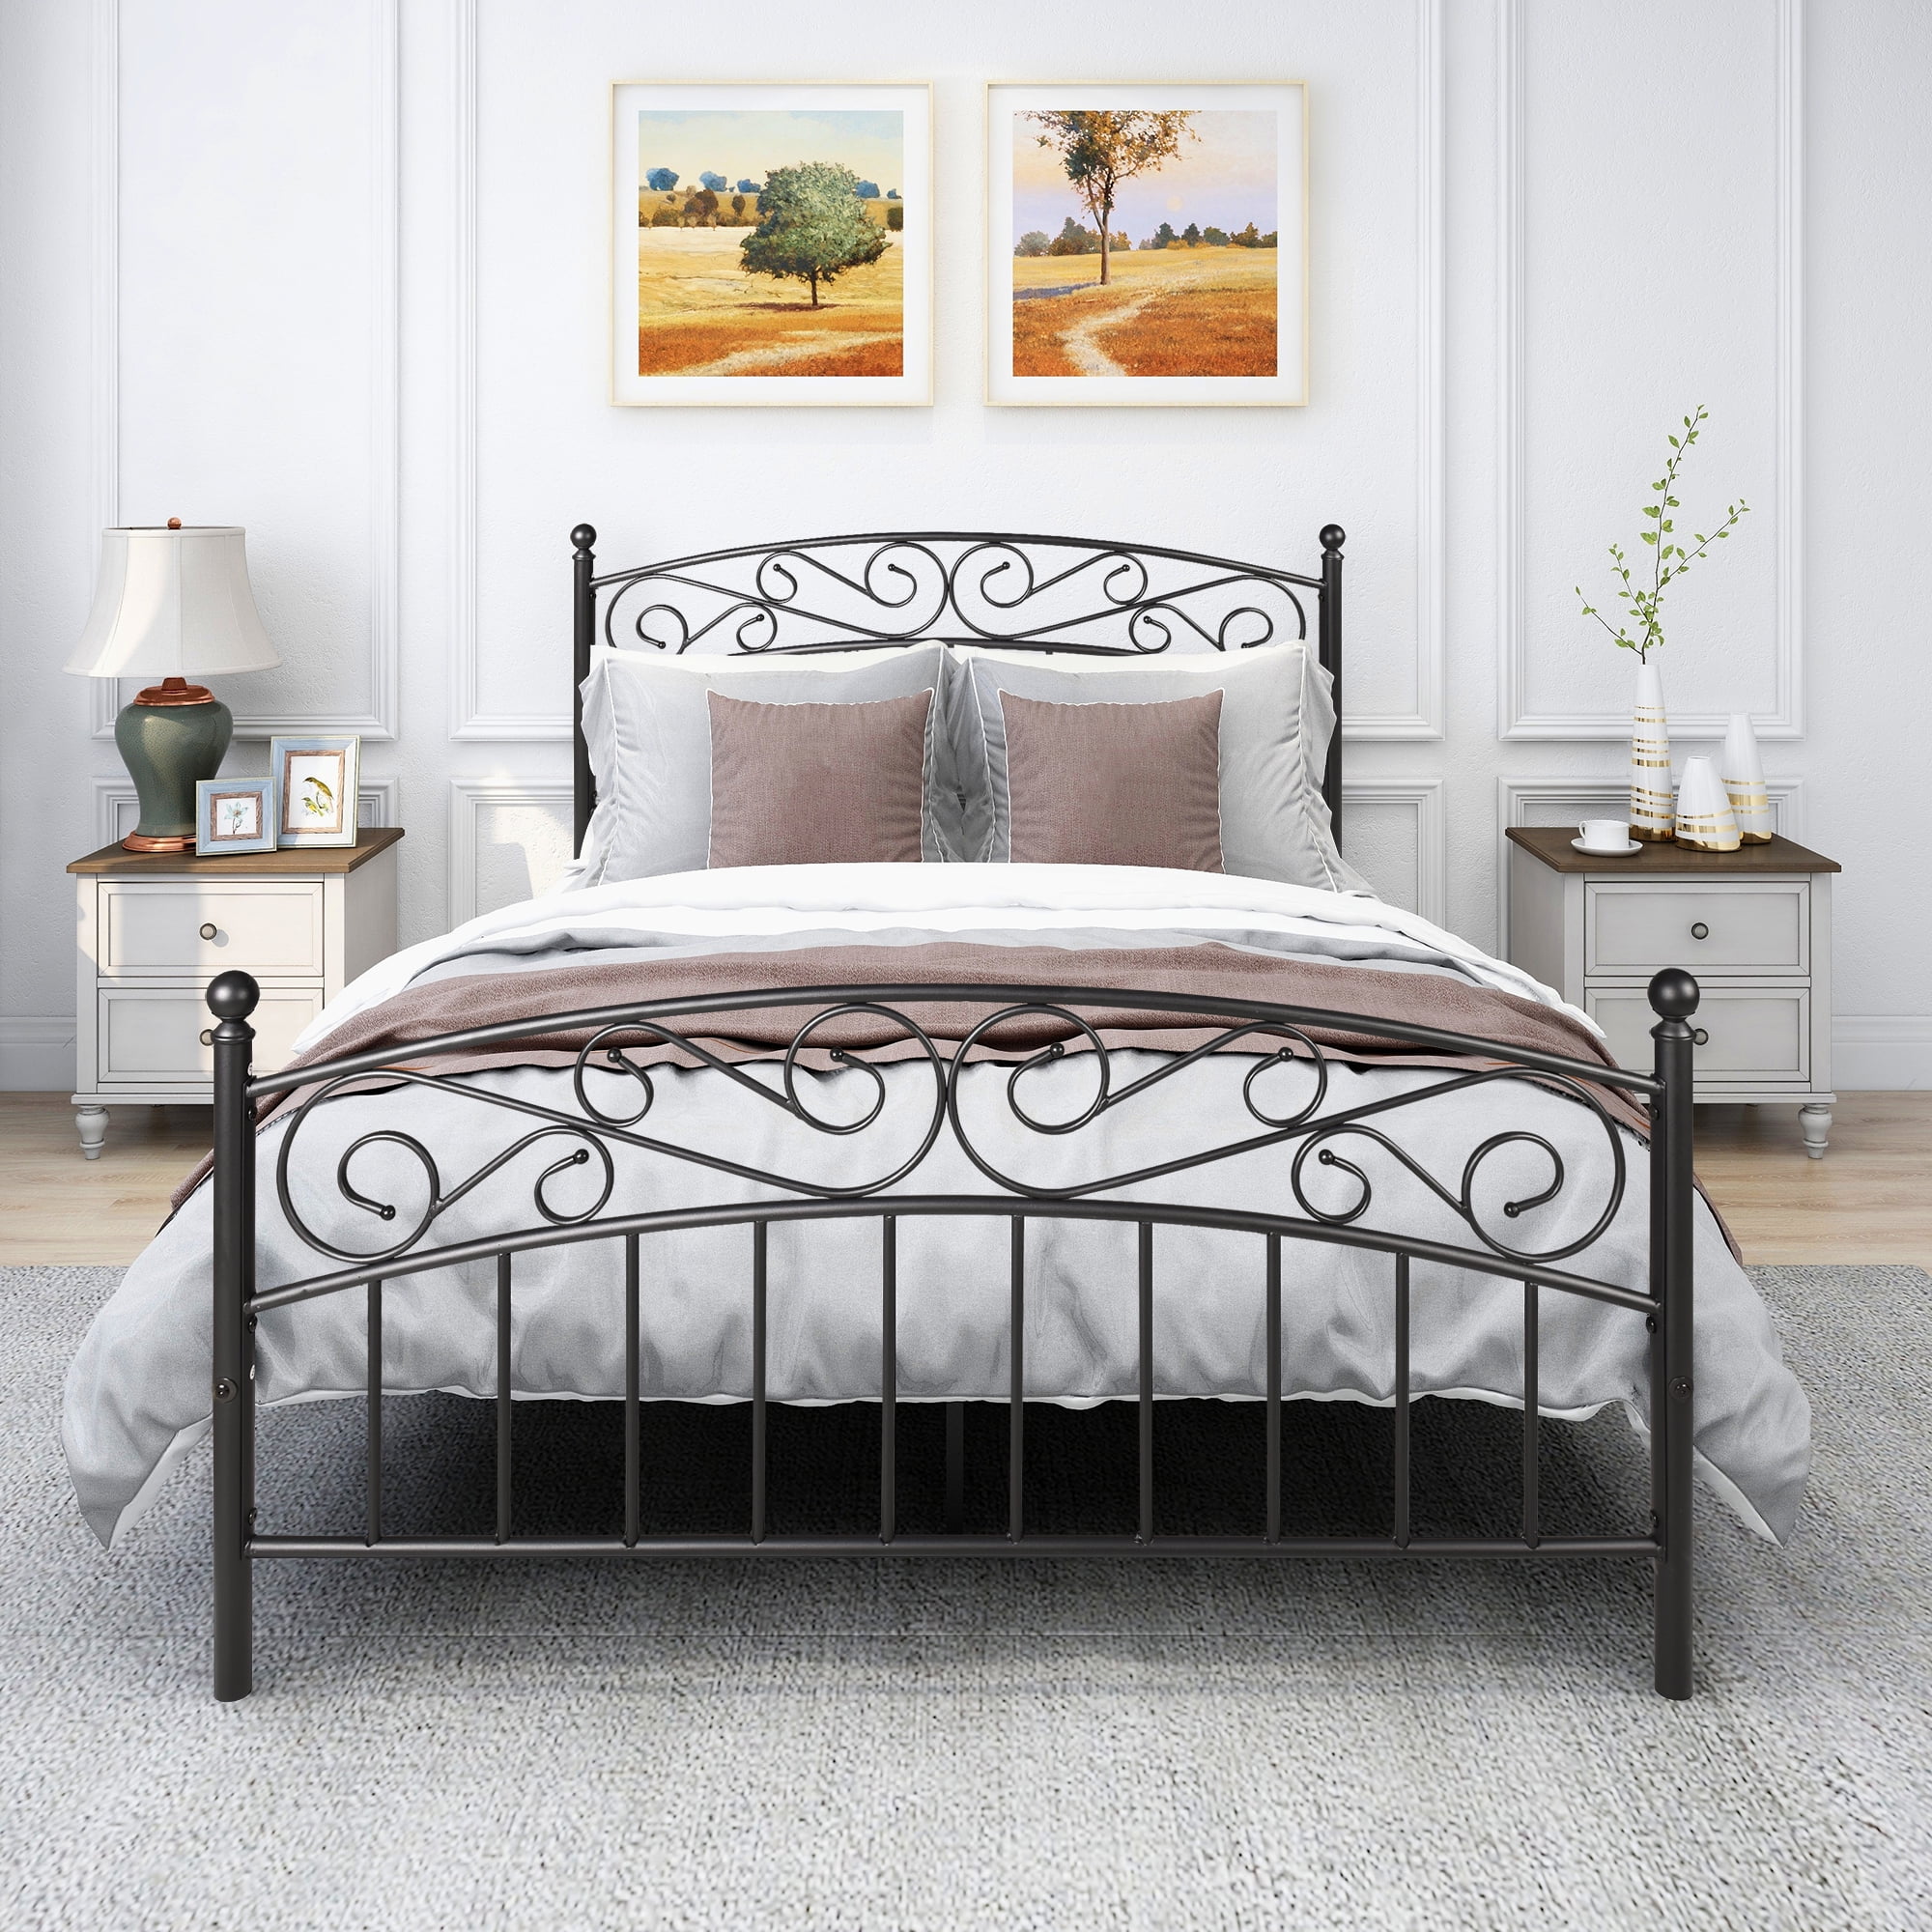 Metal Bed Frame Queen Size With Vintage, Wrought Iron King Size Bed Headboard